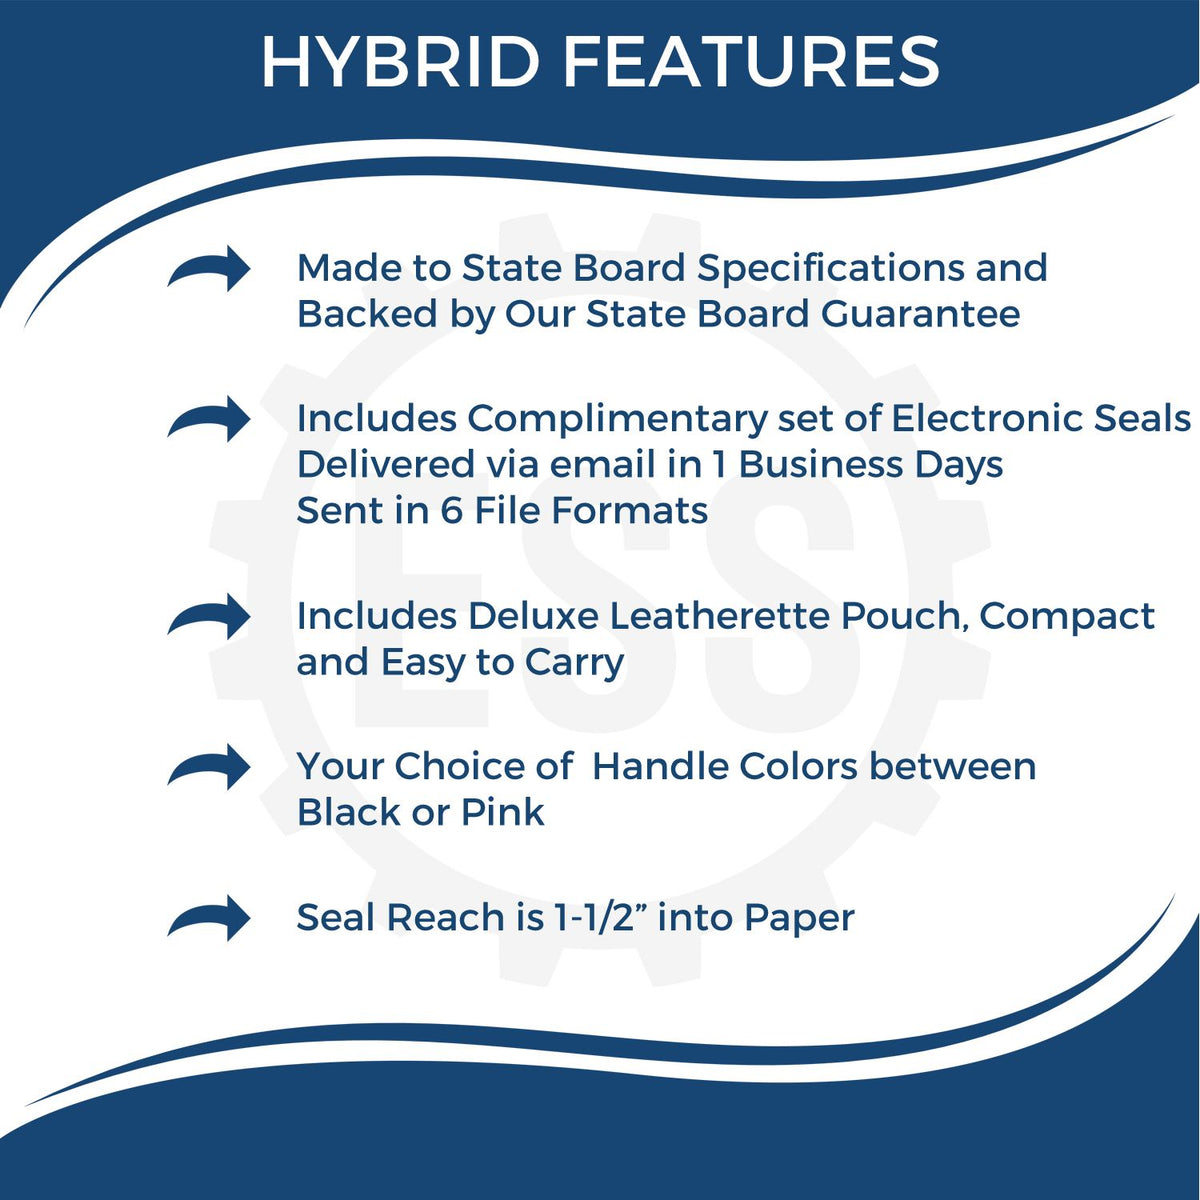 A picture of an infographic highlighting the selling points for the Hybrid Delaware Engineer Seal